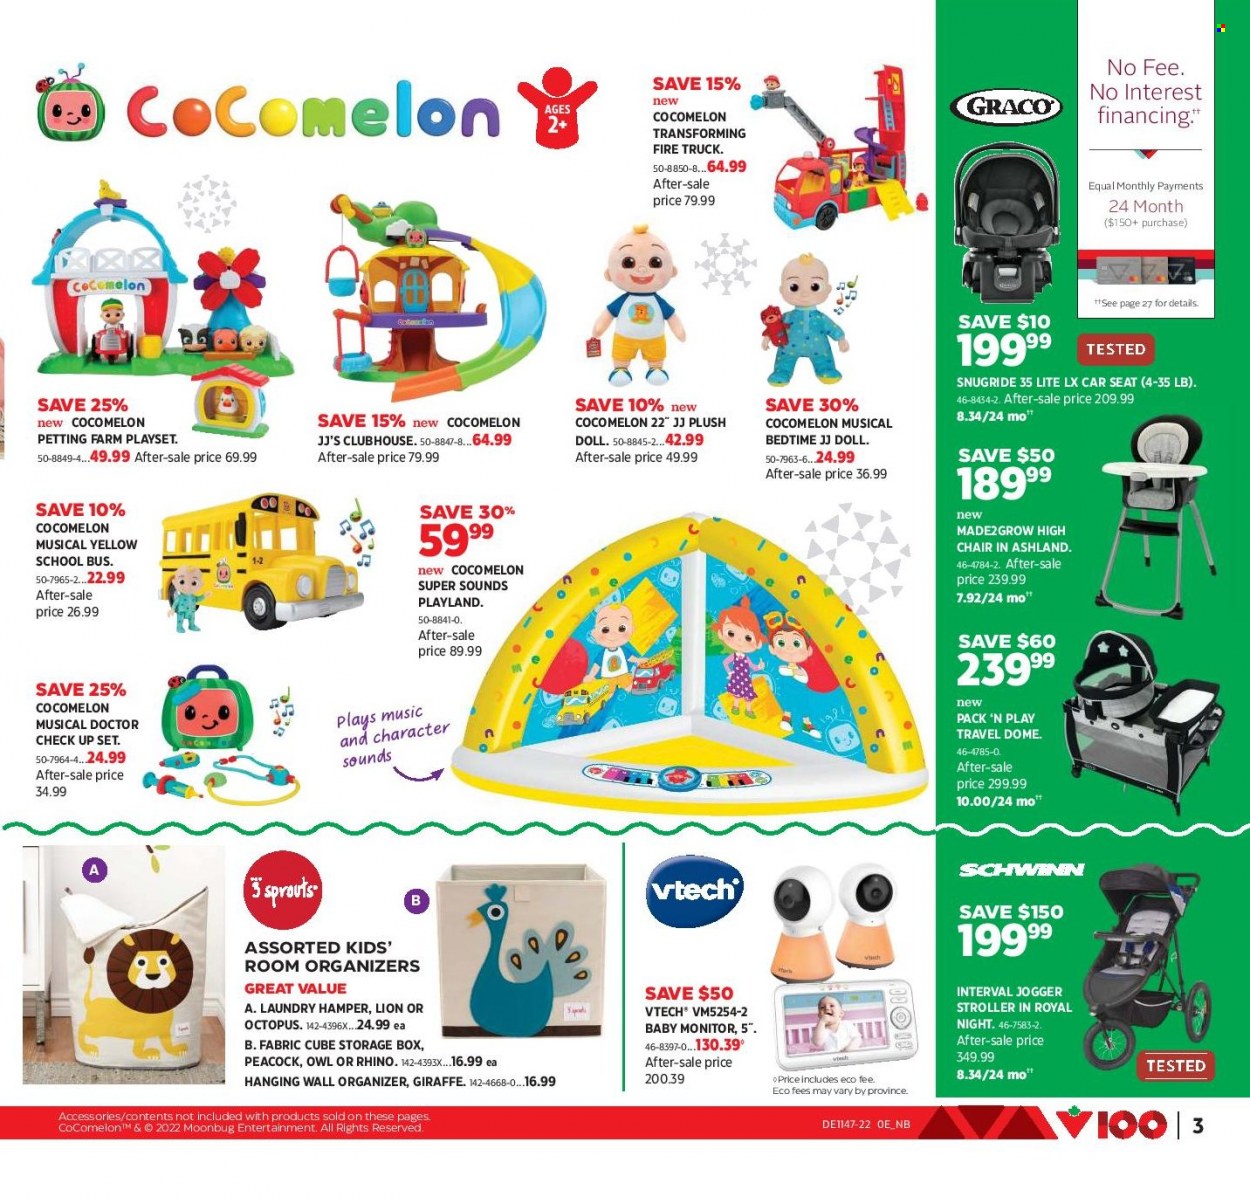 thumbnail - Canadian Tire Flyer - November 18, 2022 - December 08, 2022 - Sales products - chair, laundry hamper, baby monitor, high chair, doll, Vtech, play set, owl, baby car seat, Rhino. Page 3.